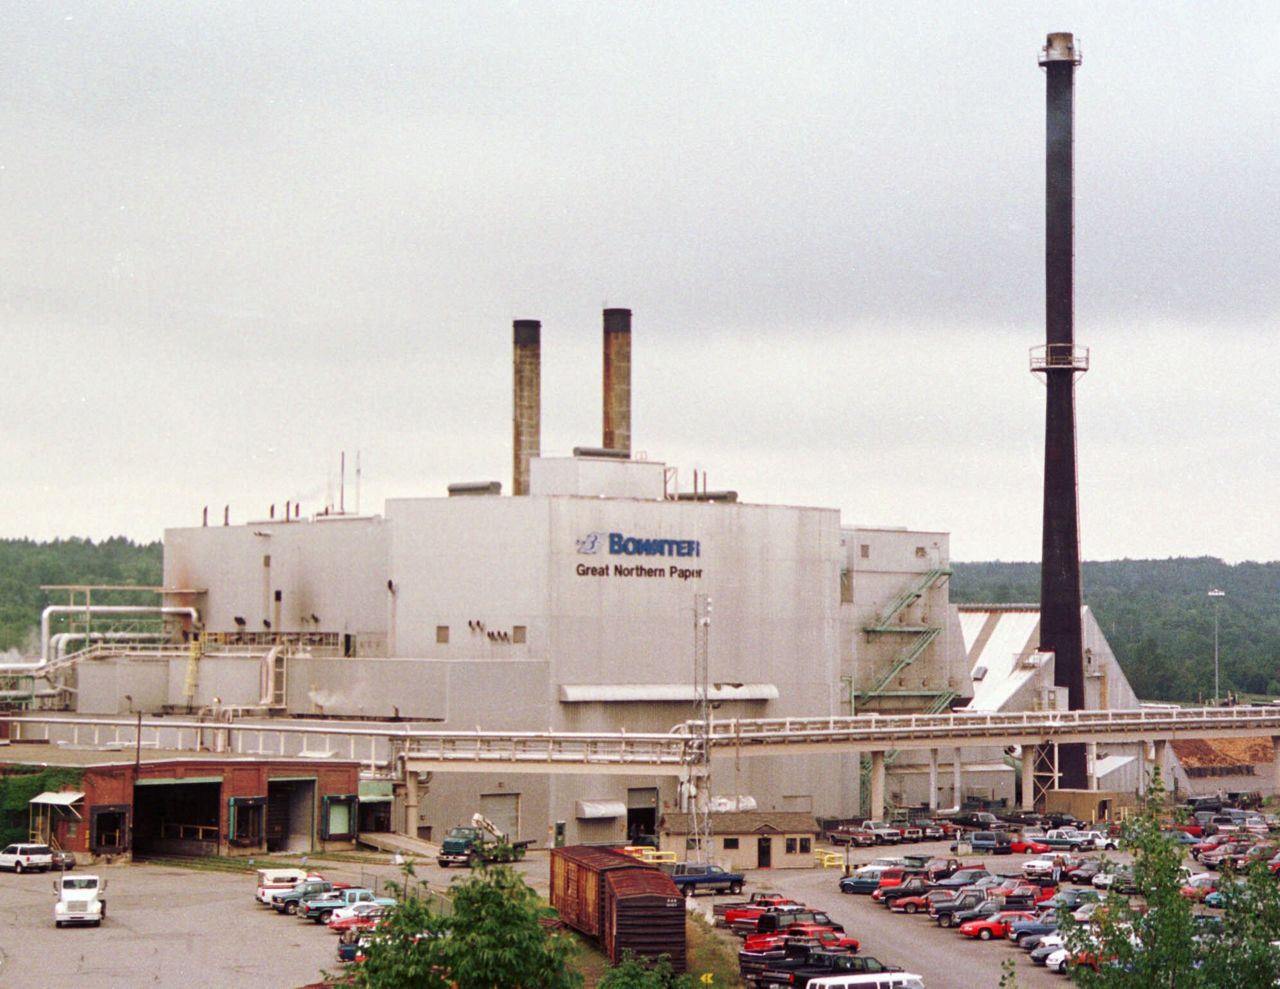 Bowater's Great Northern Paper Co.'s paper mill in East Millinocket, Maine, as seen in 1999.